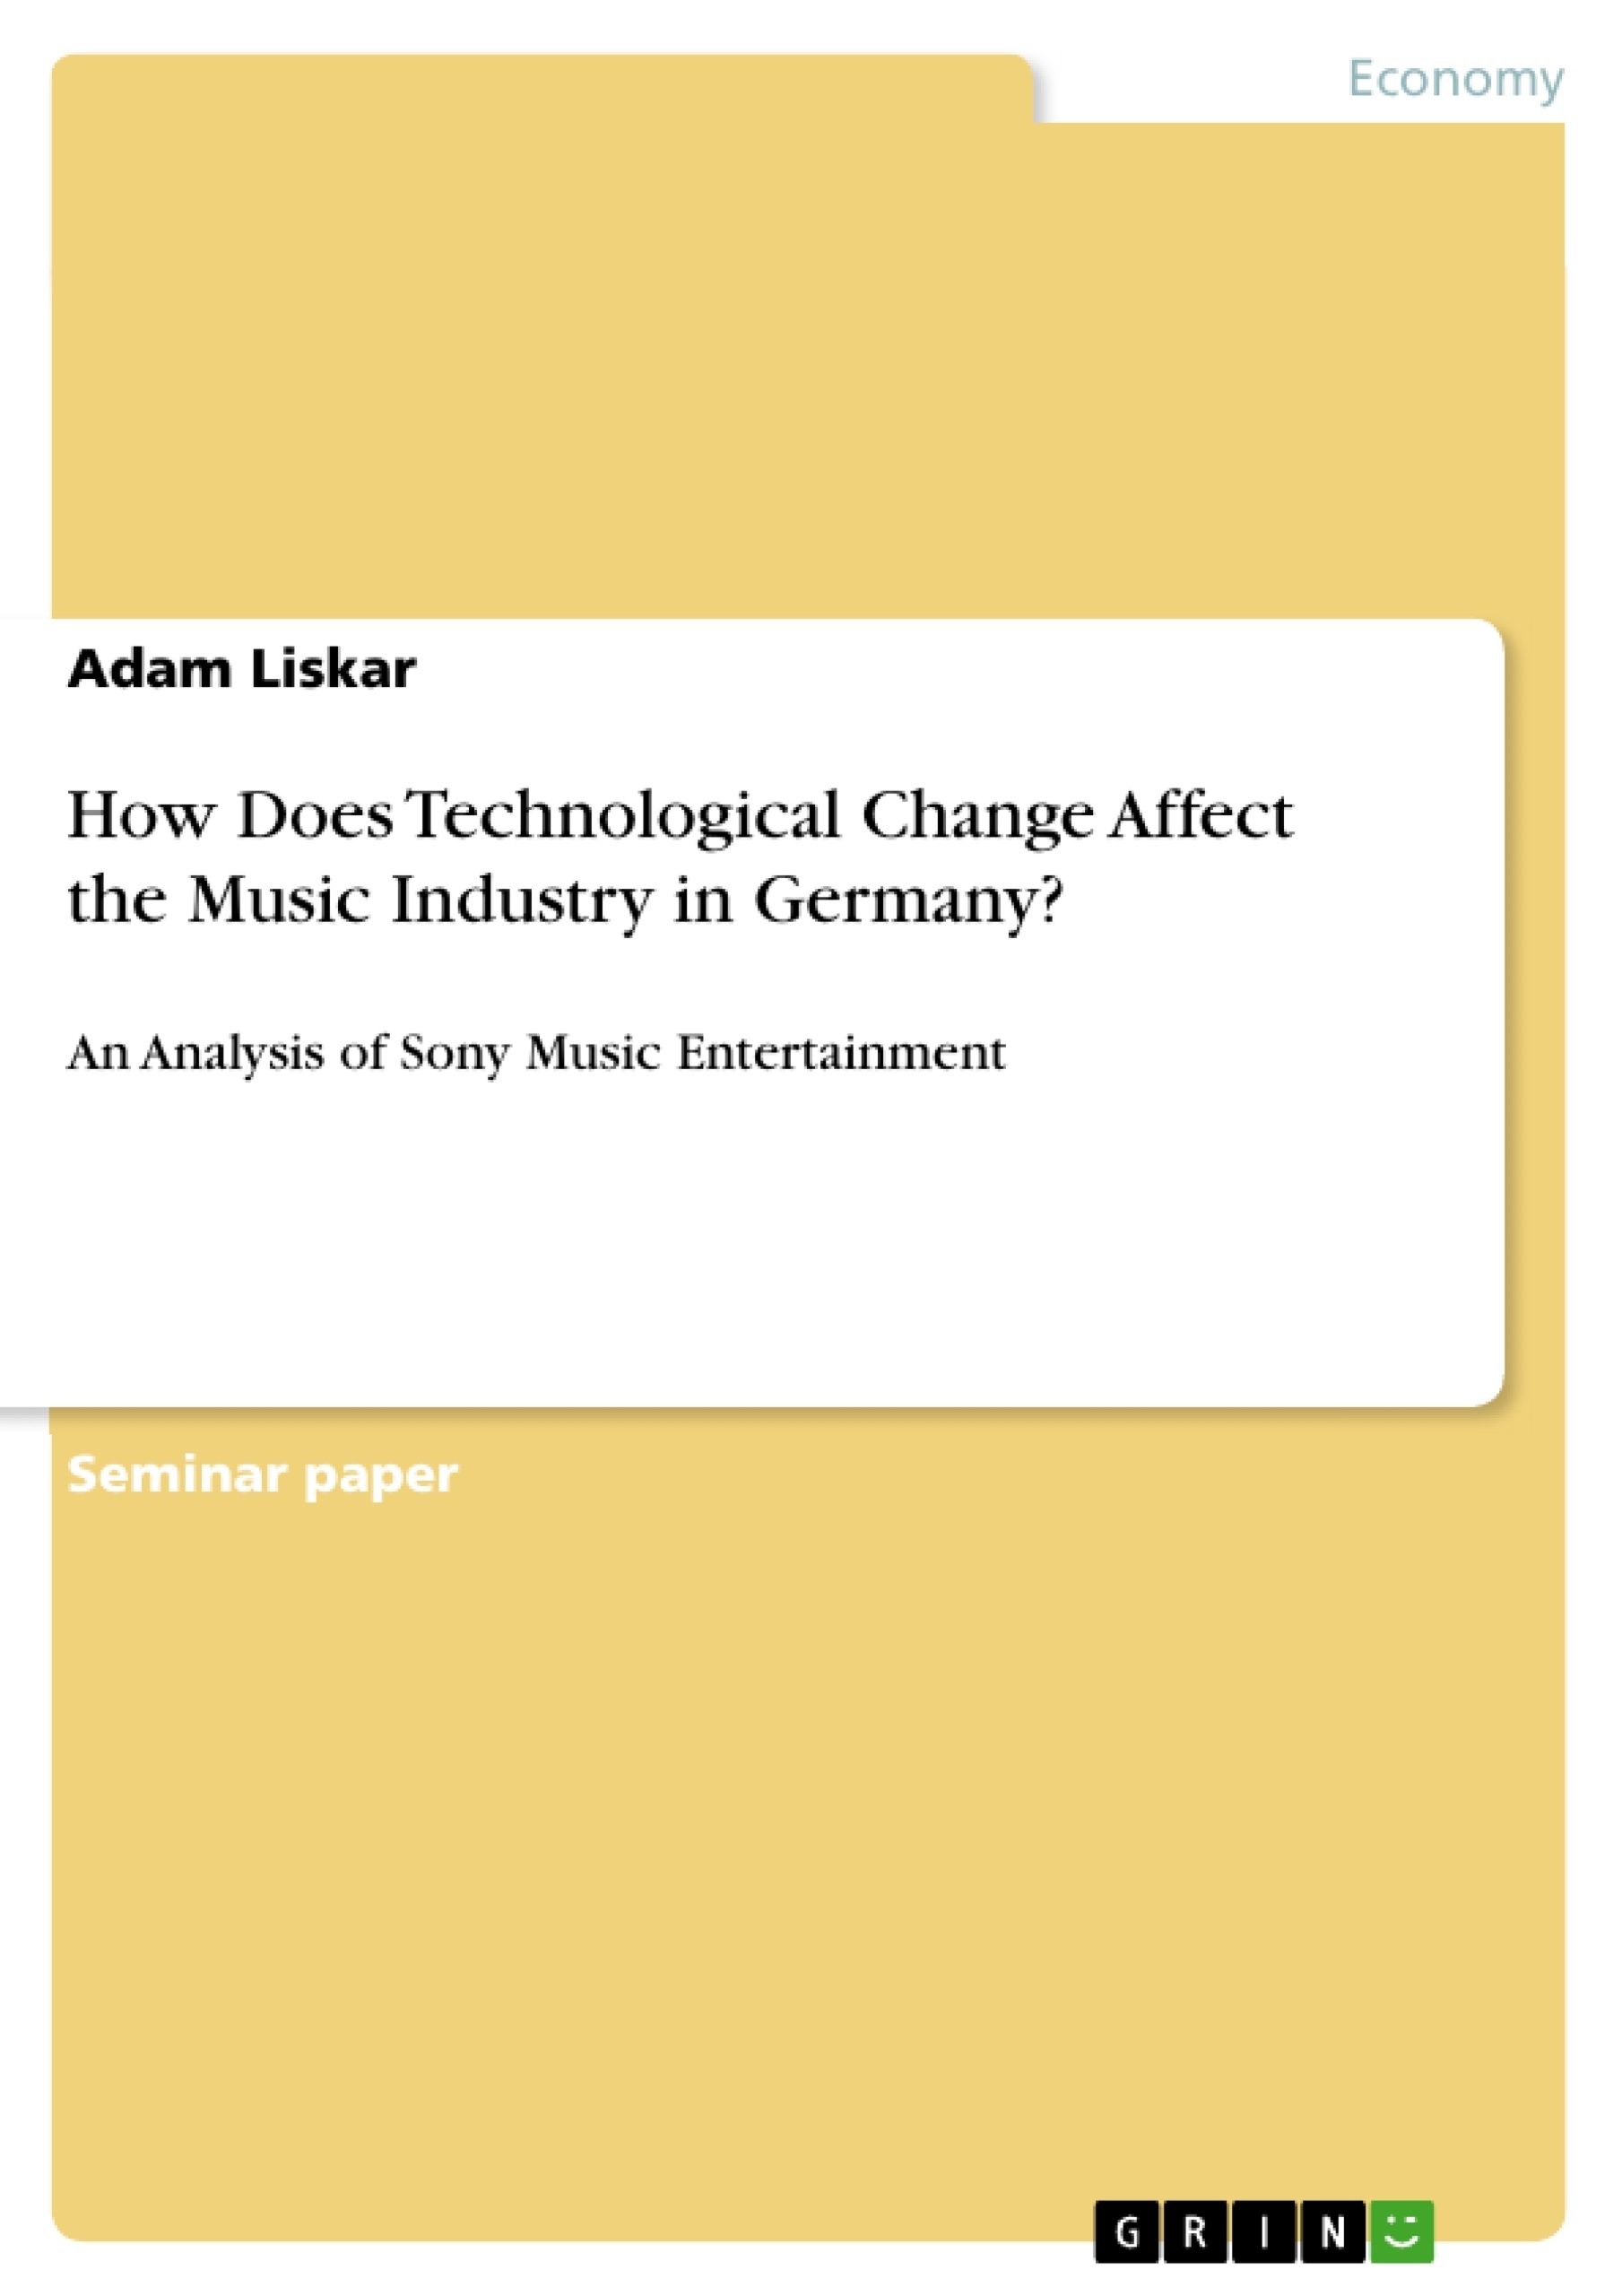 Título: How Does Technological Change Affect the Music Industry in Germany?